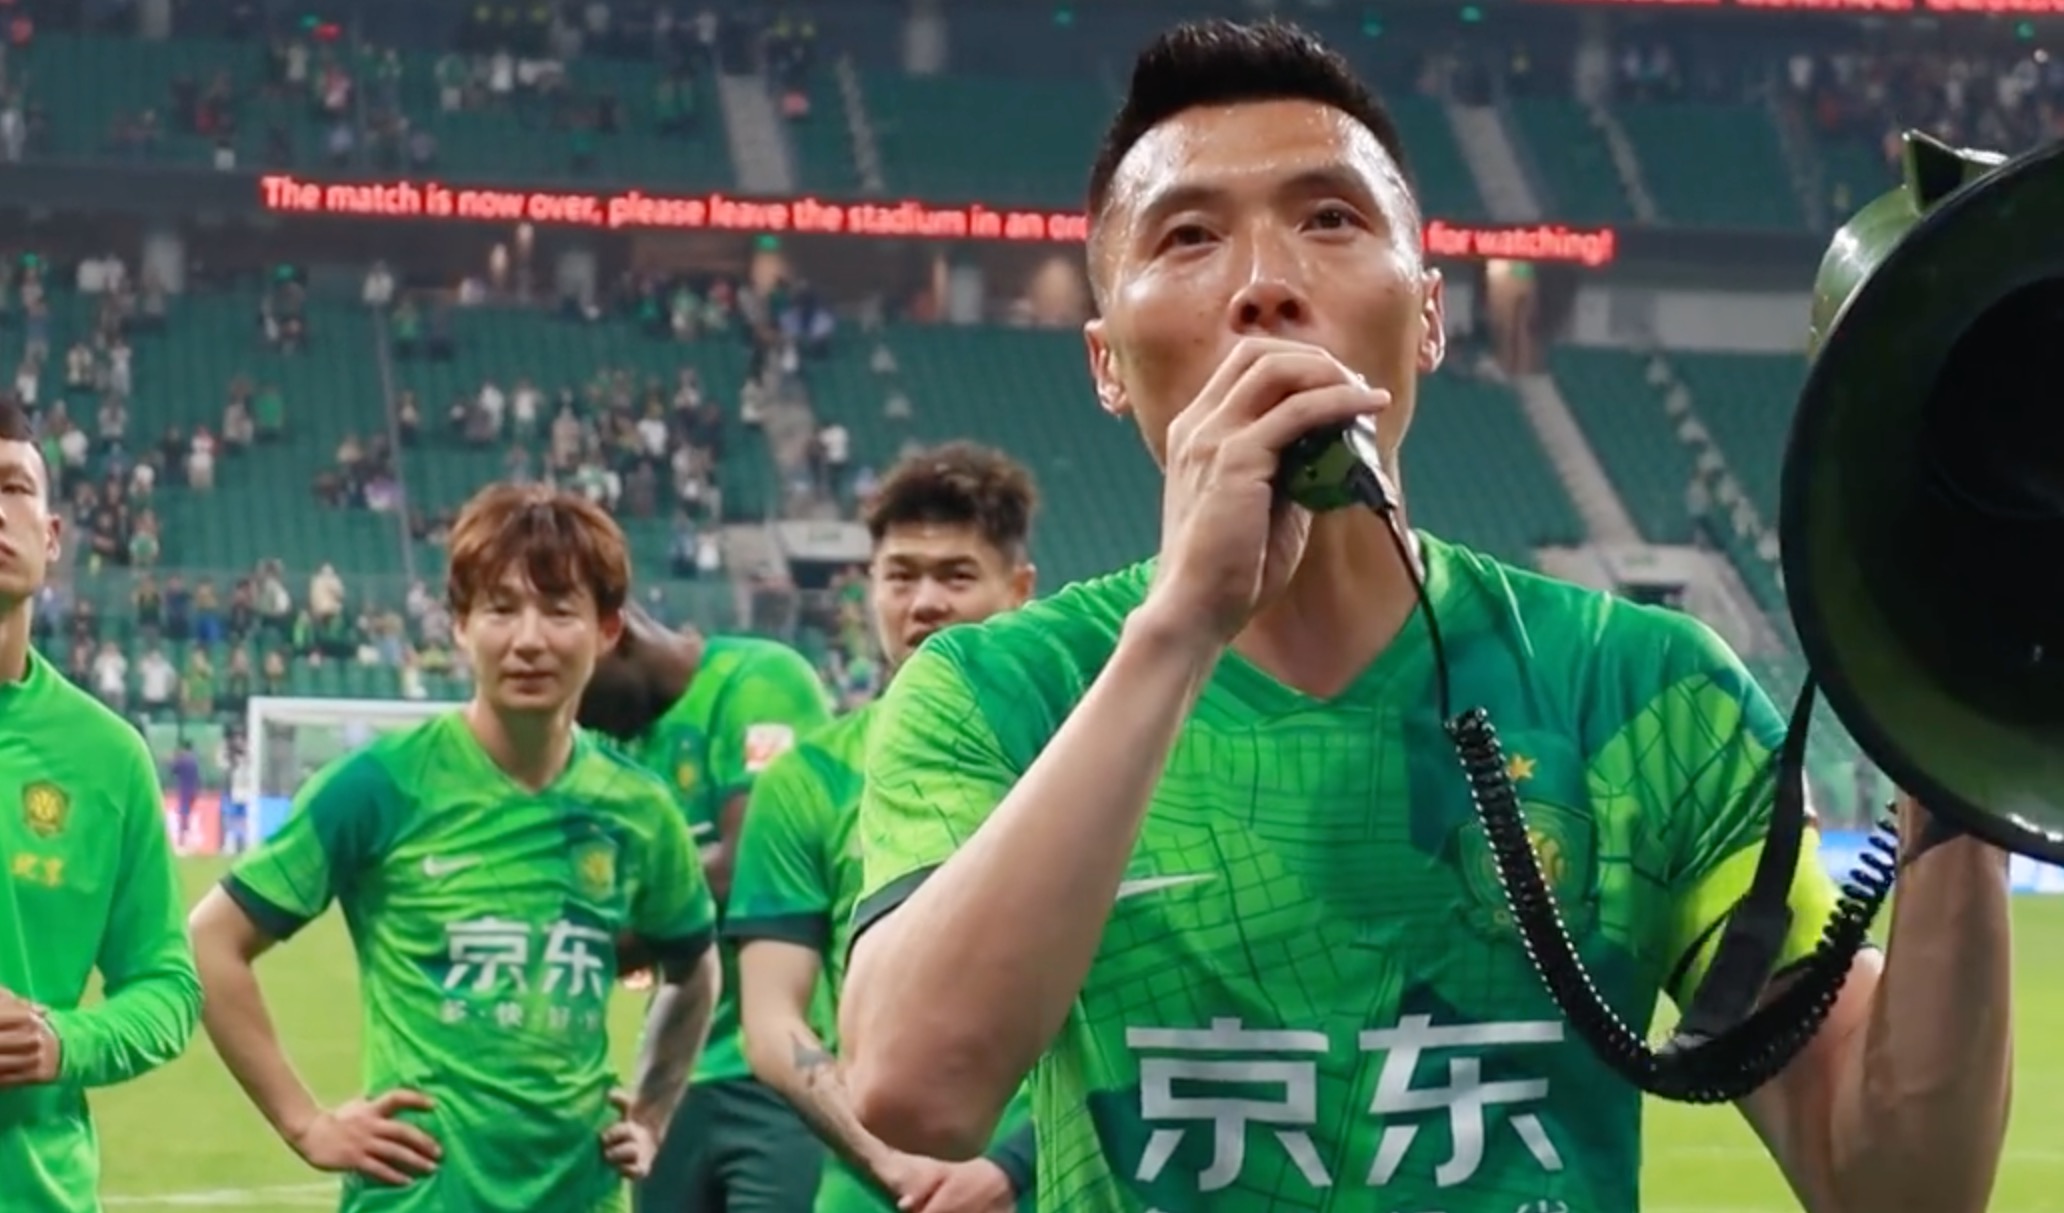 Beijing Guoan captain Yu Dabao addresses the fans after their Chinese Super League draw with Tianjin Jinmen Tiger at the new Workers' Stadium in Beijing, China, May 10, 2023. /Beijing Guoan